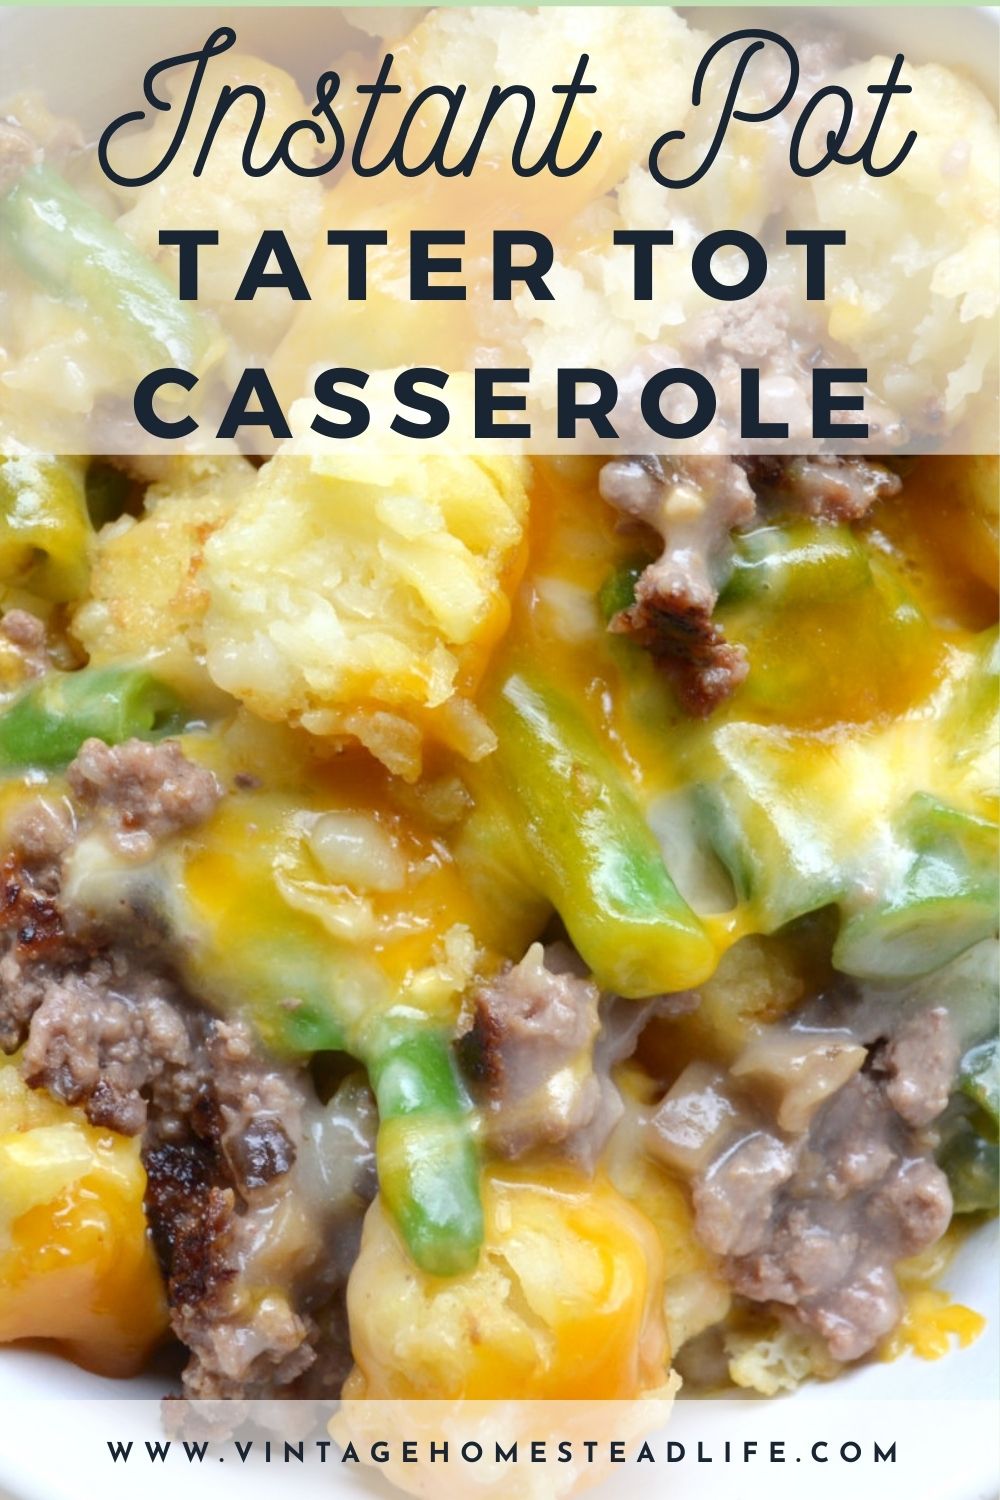 Tater Tot Casserole in the Instant Pot! This delicious recipe is a new take on this classic midwestern comfort food casserole! 